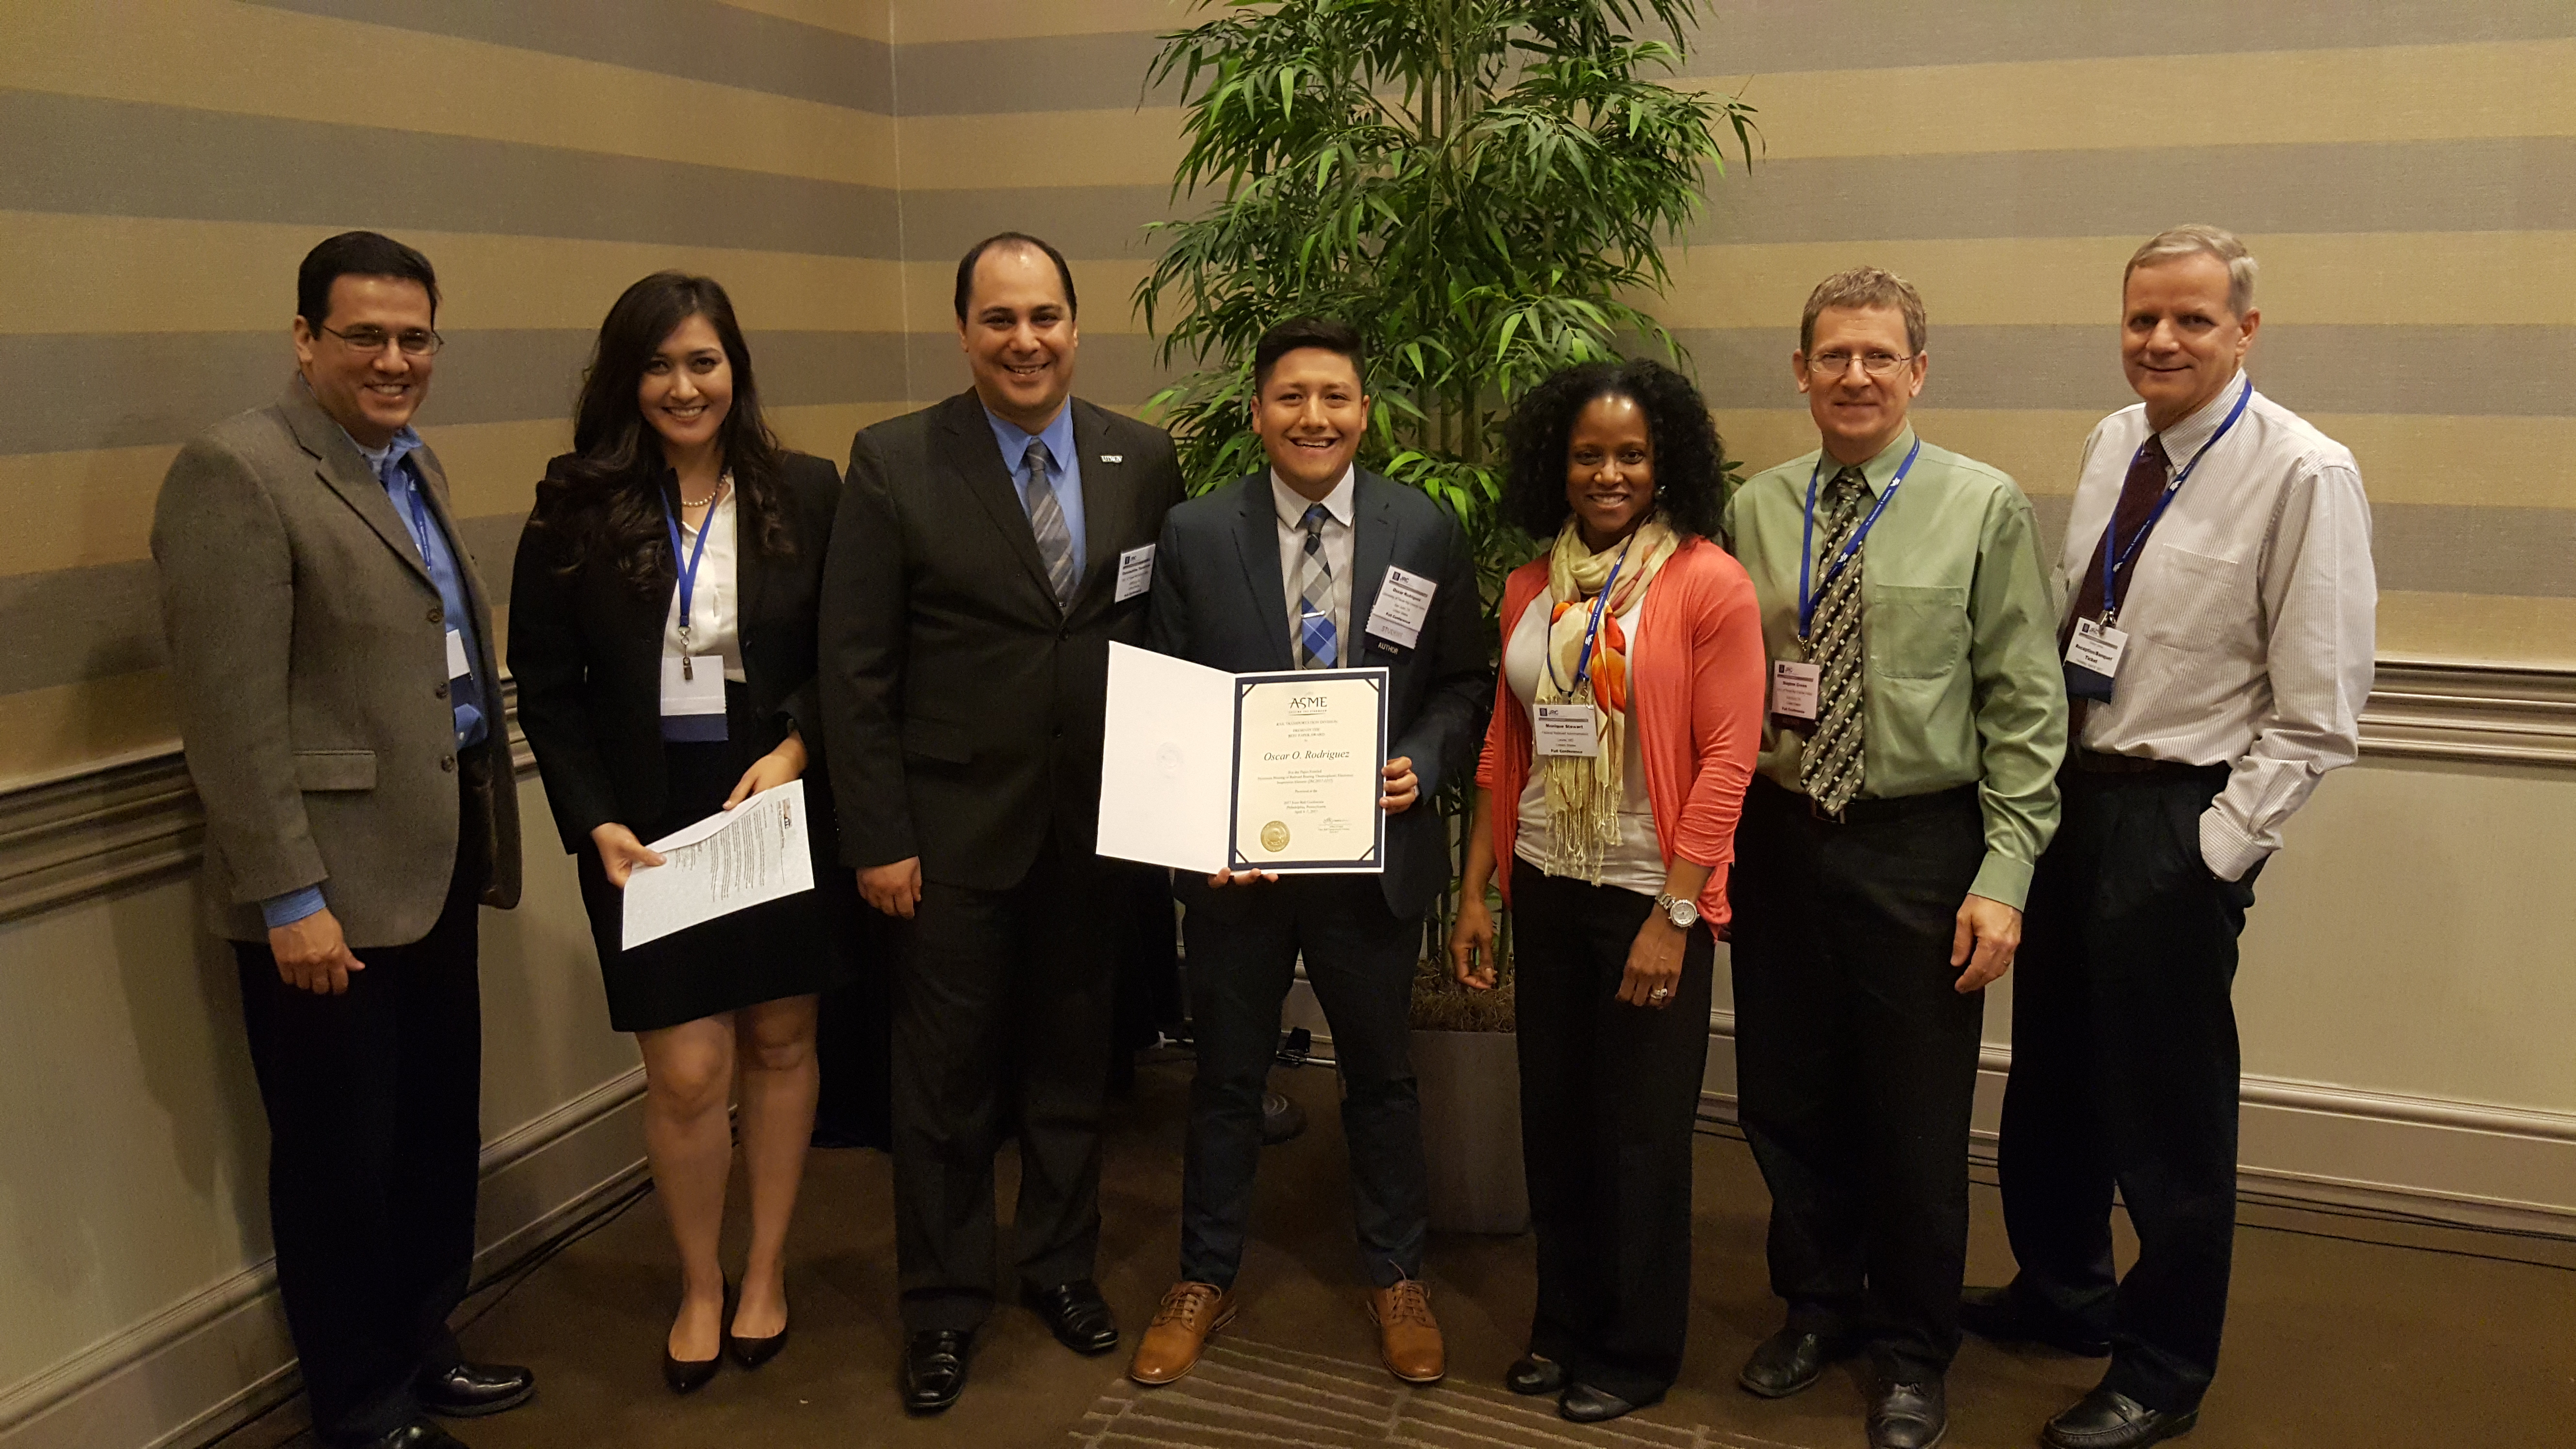 UTCRS UTRGV Research Group receives Best Paper honors at the 2017 ASME Joint Rail Conference